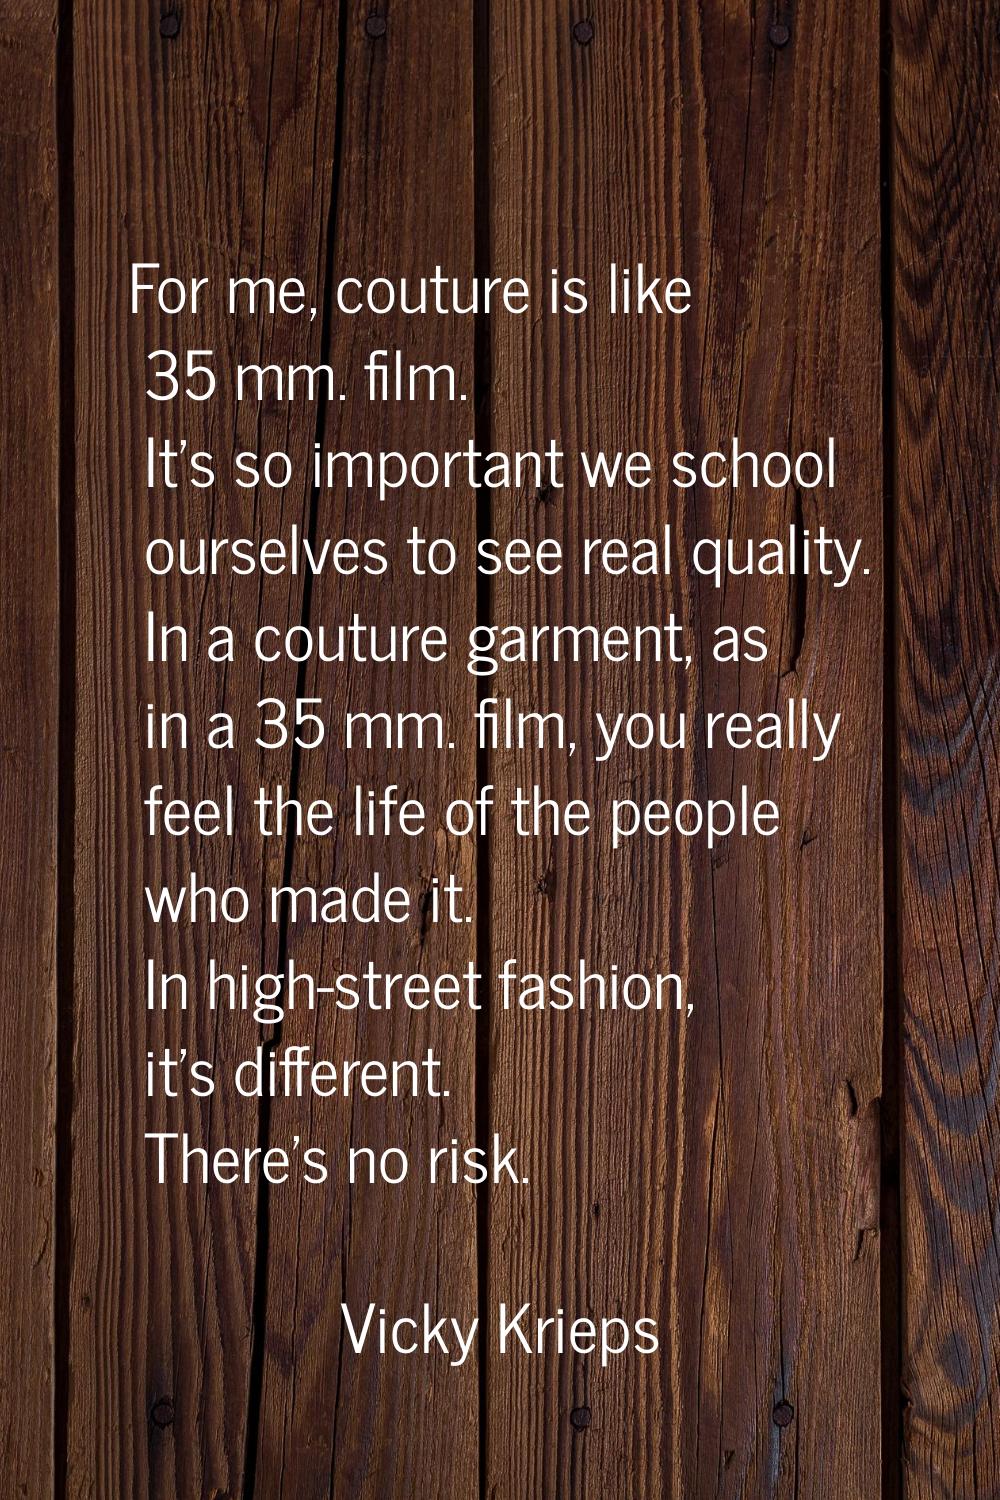 For me, couture is like 35 mm. film. It's so important we school ourselves to see real quality. In 